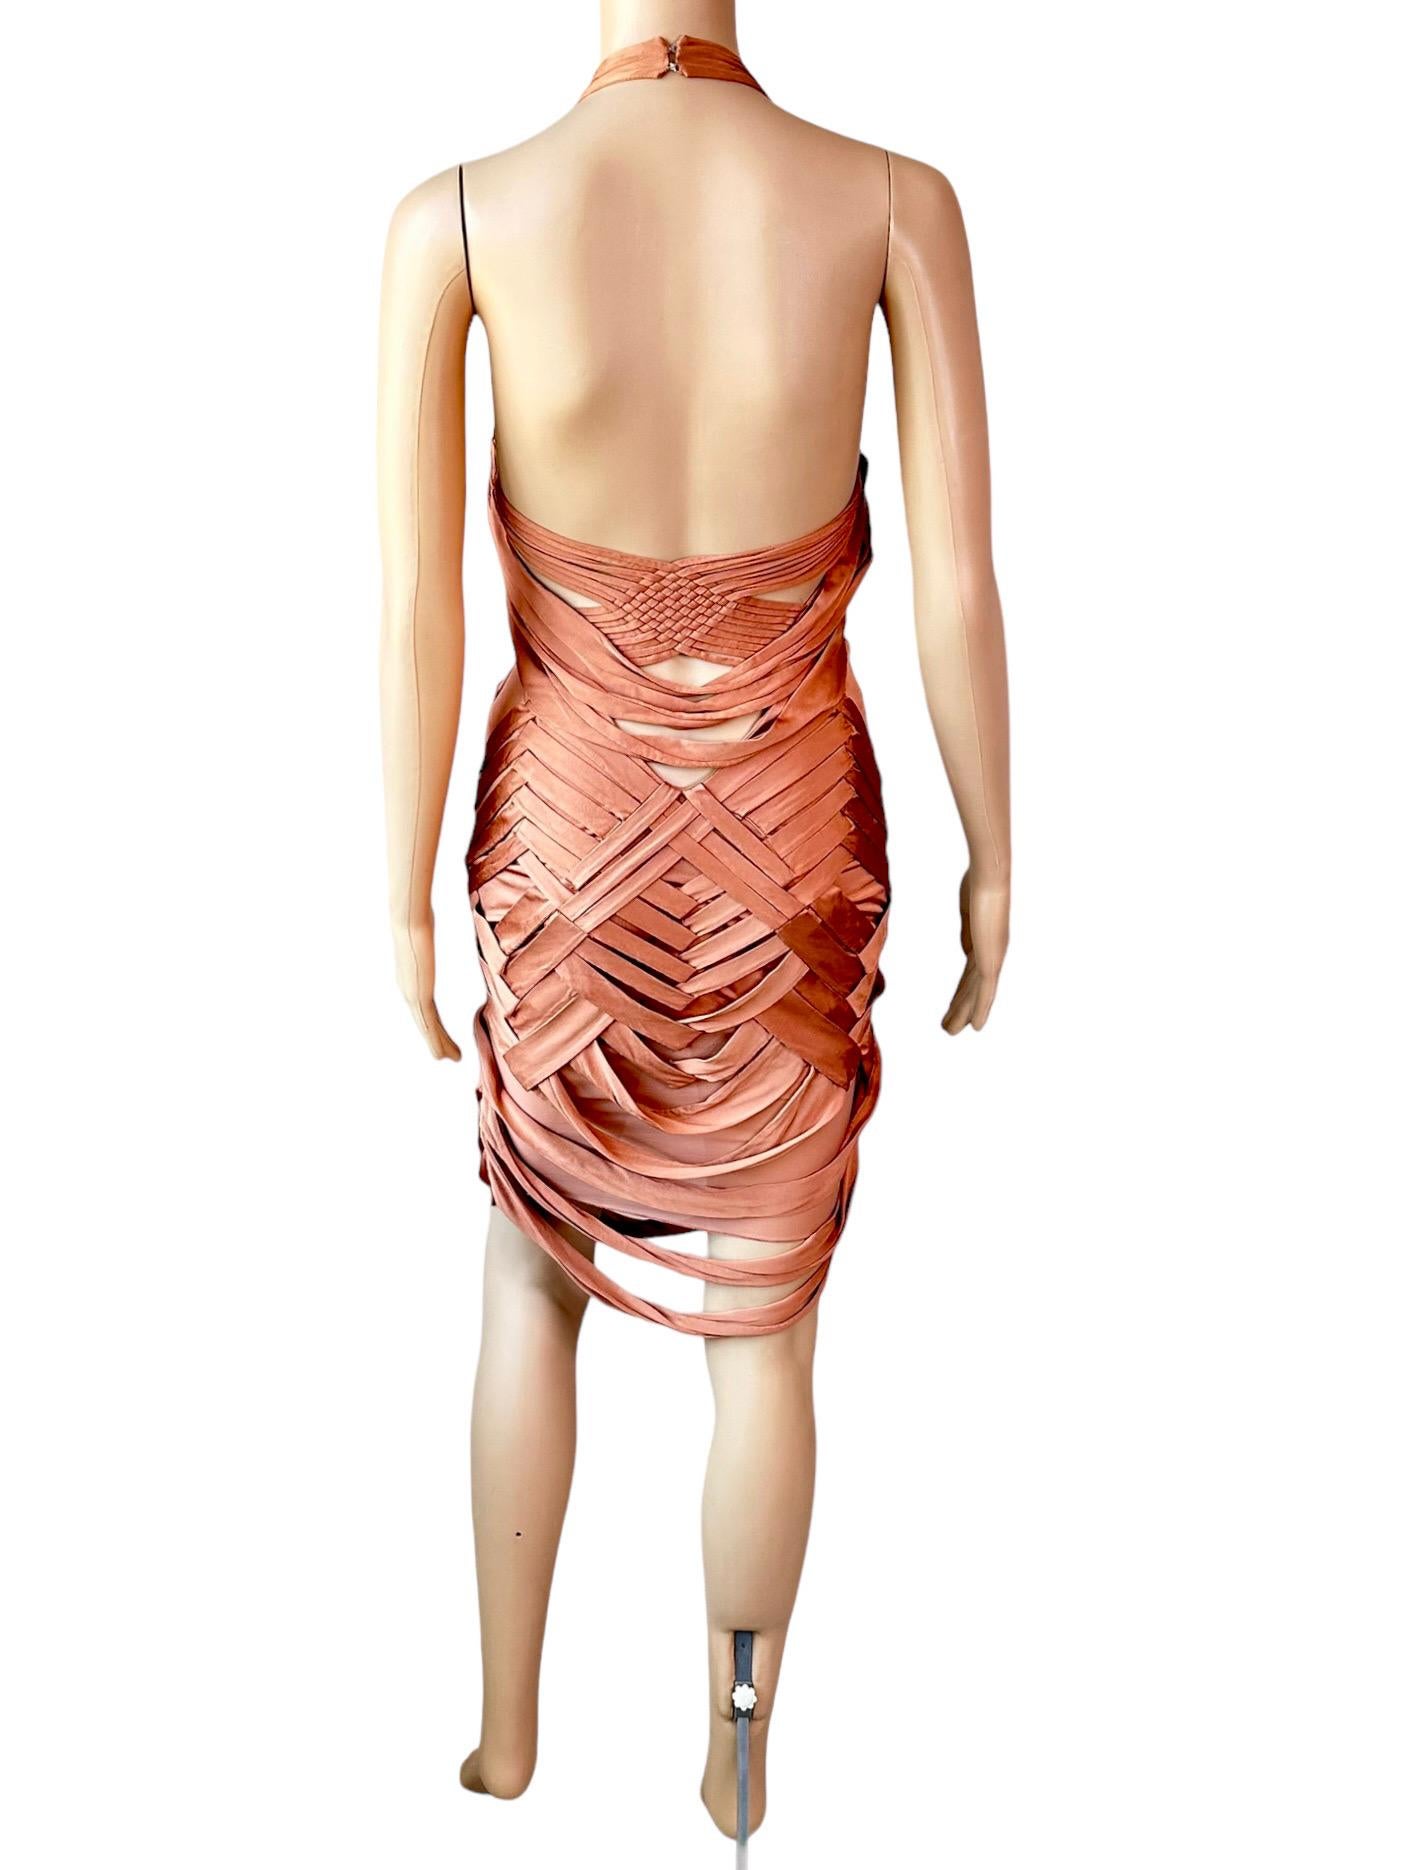 Women's or Men's Gucci S/S 2005 Fringed Plunging Cutout Backless Mini Dress